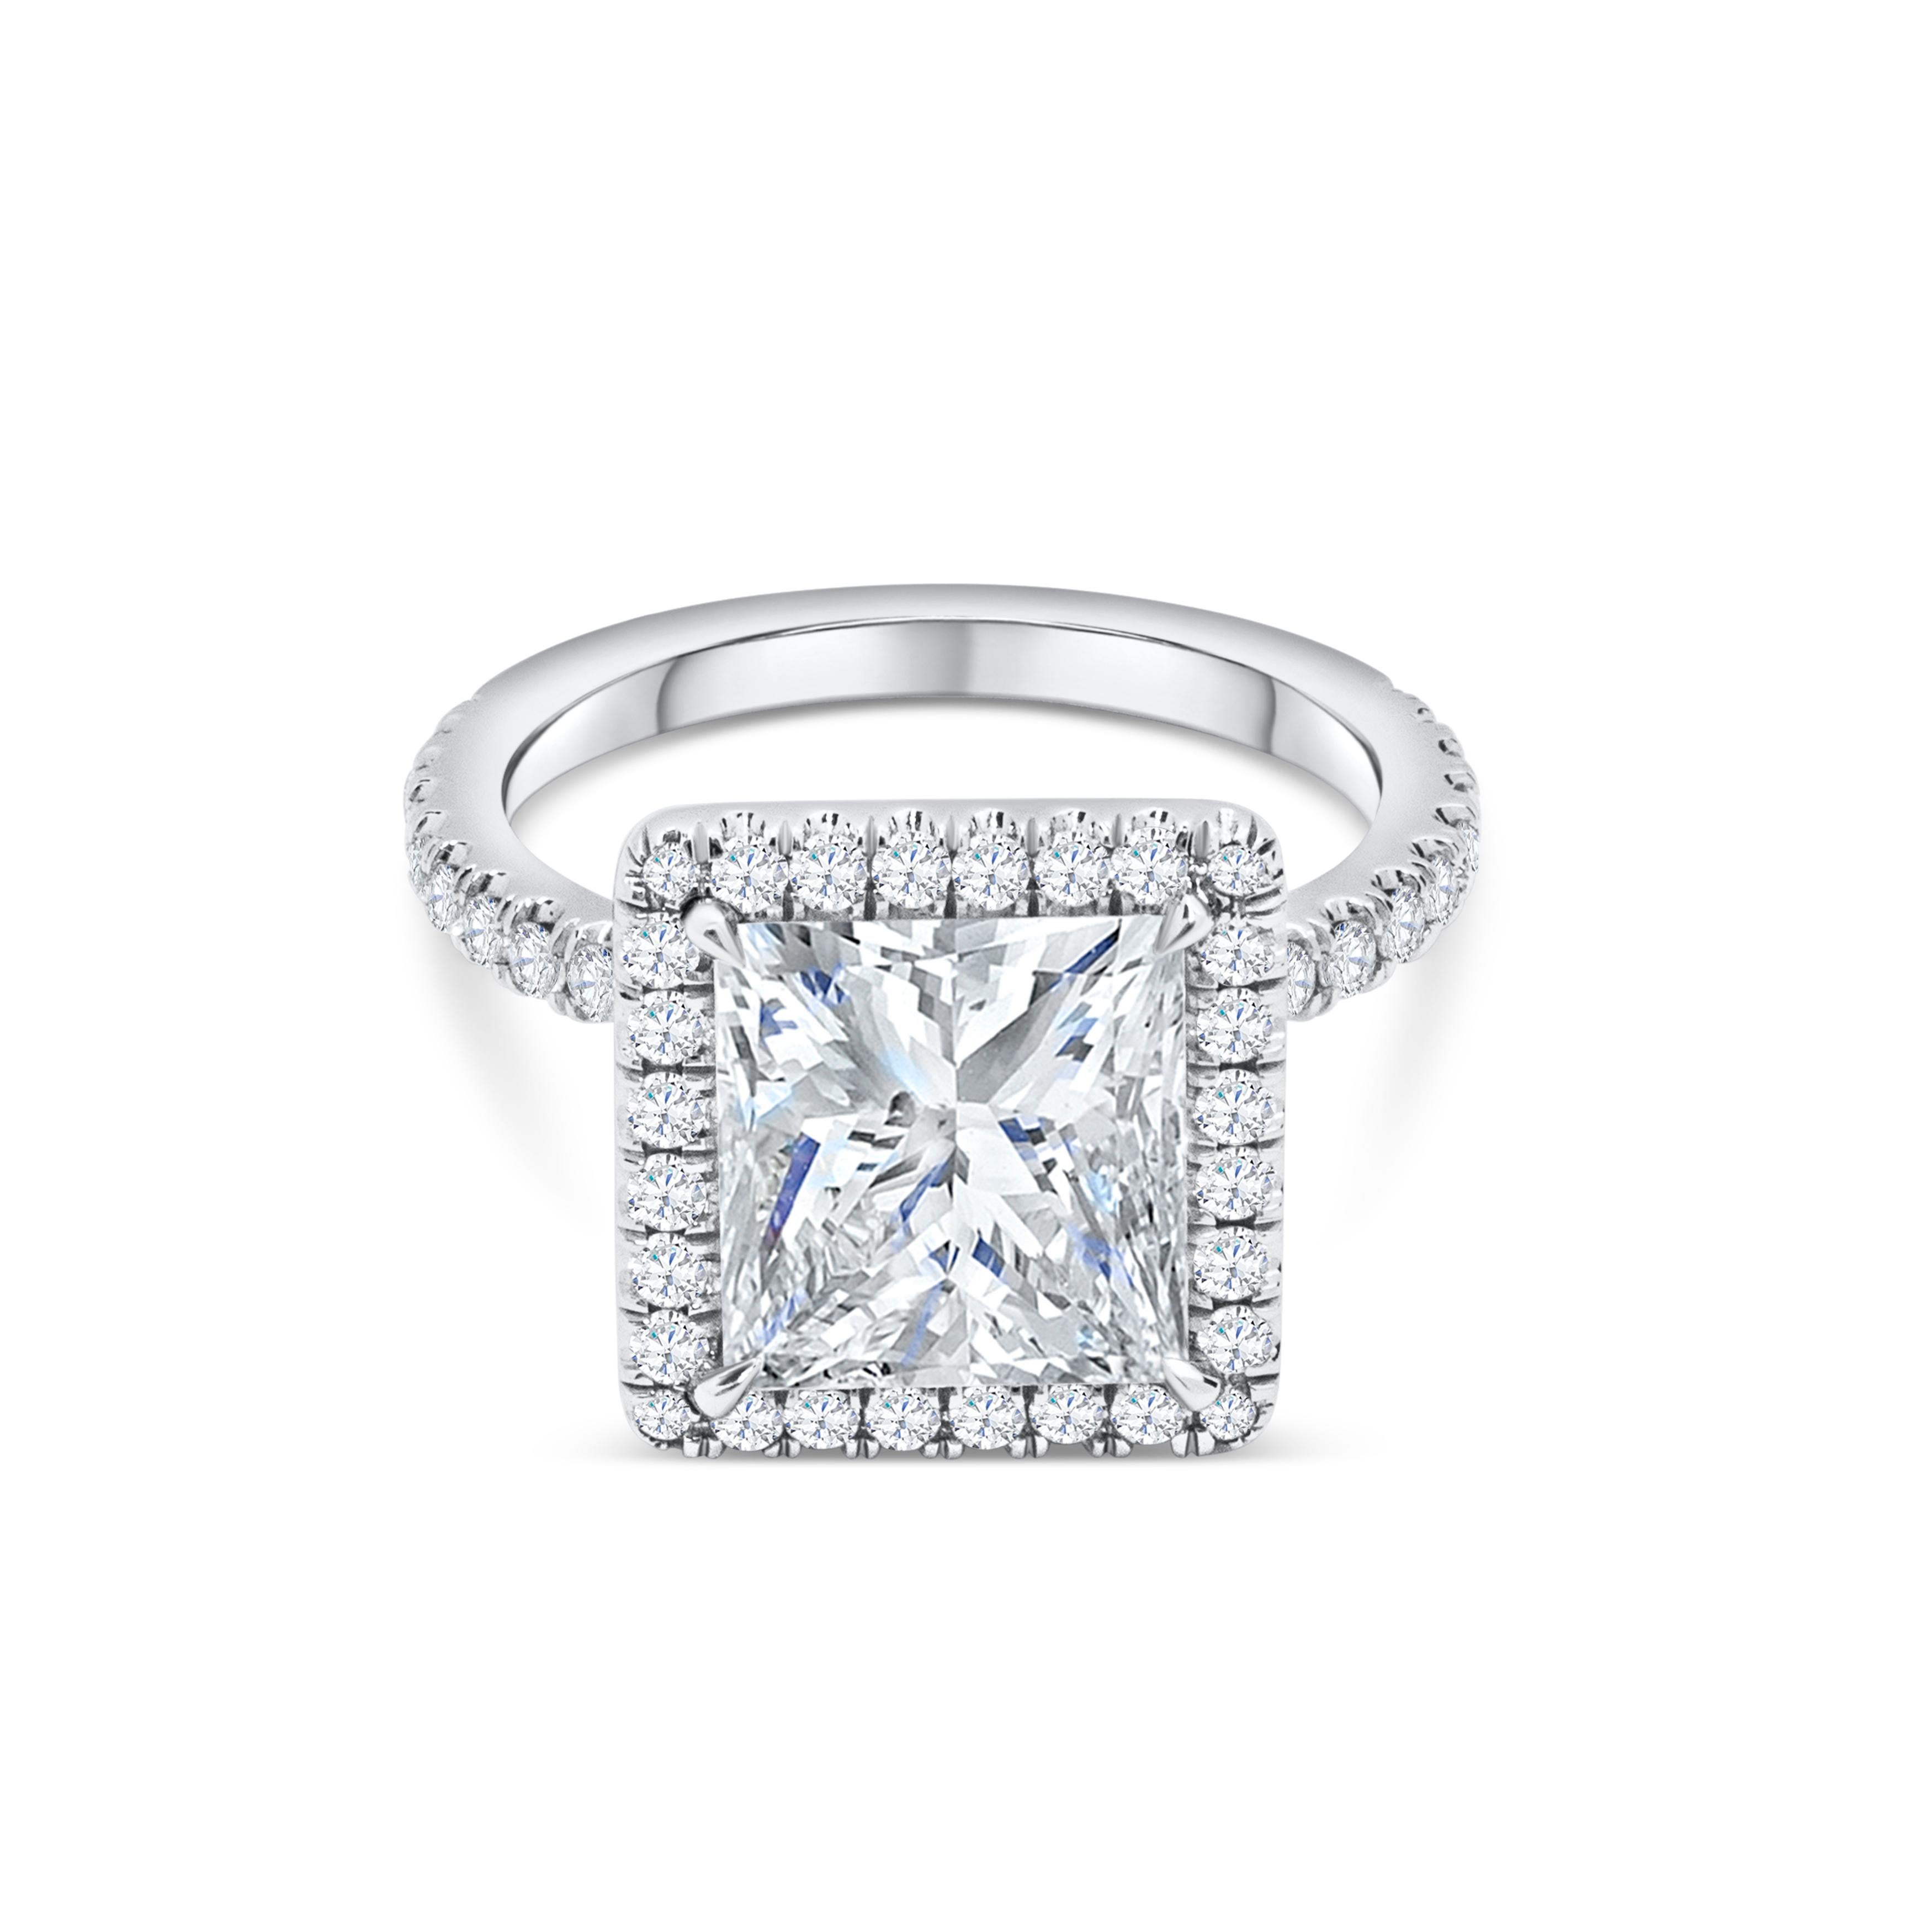 Showcasing a brilliant 4.07 carats princess cut diamond certified by GIA as I color, VS2 in clarity and set in a four prong basket setting. Surrounded by a single role of round brilliant diamonds in halo setting. Shank is diamond encrusted in half